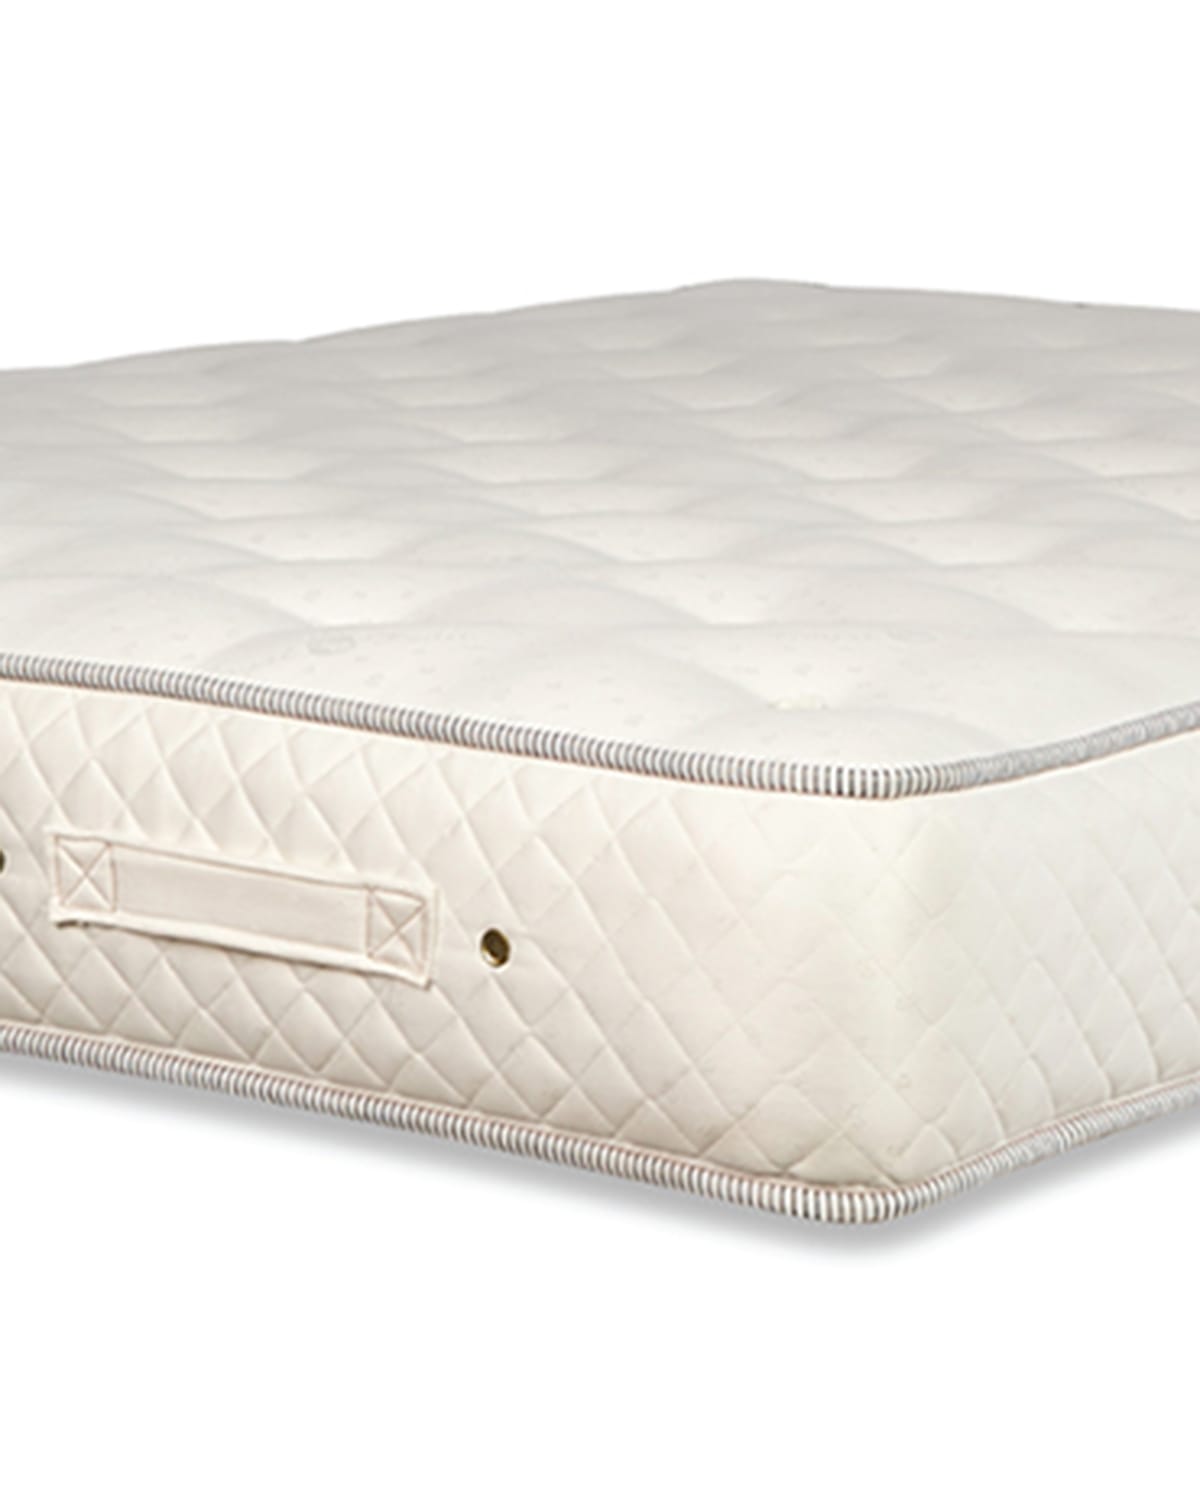 Royal-pedic Dream Spring Limited Firm Twin Mattress In White